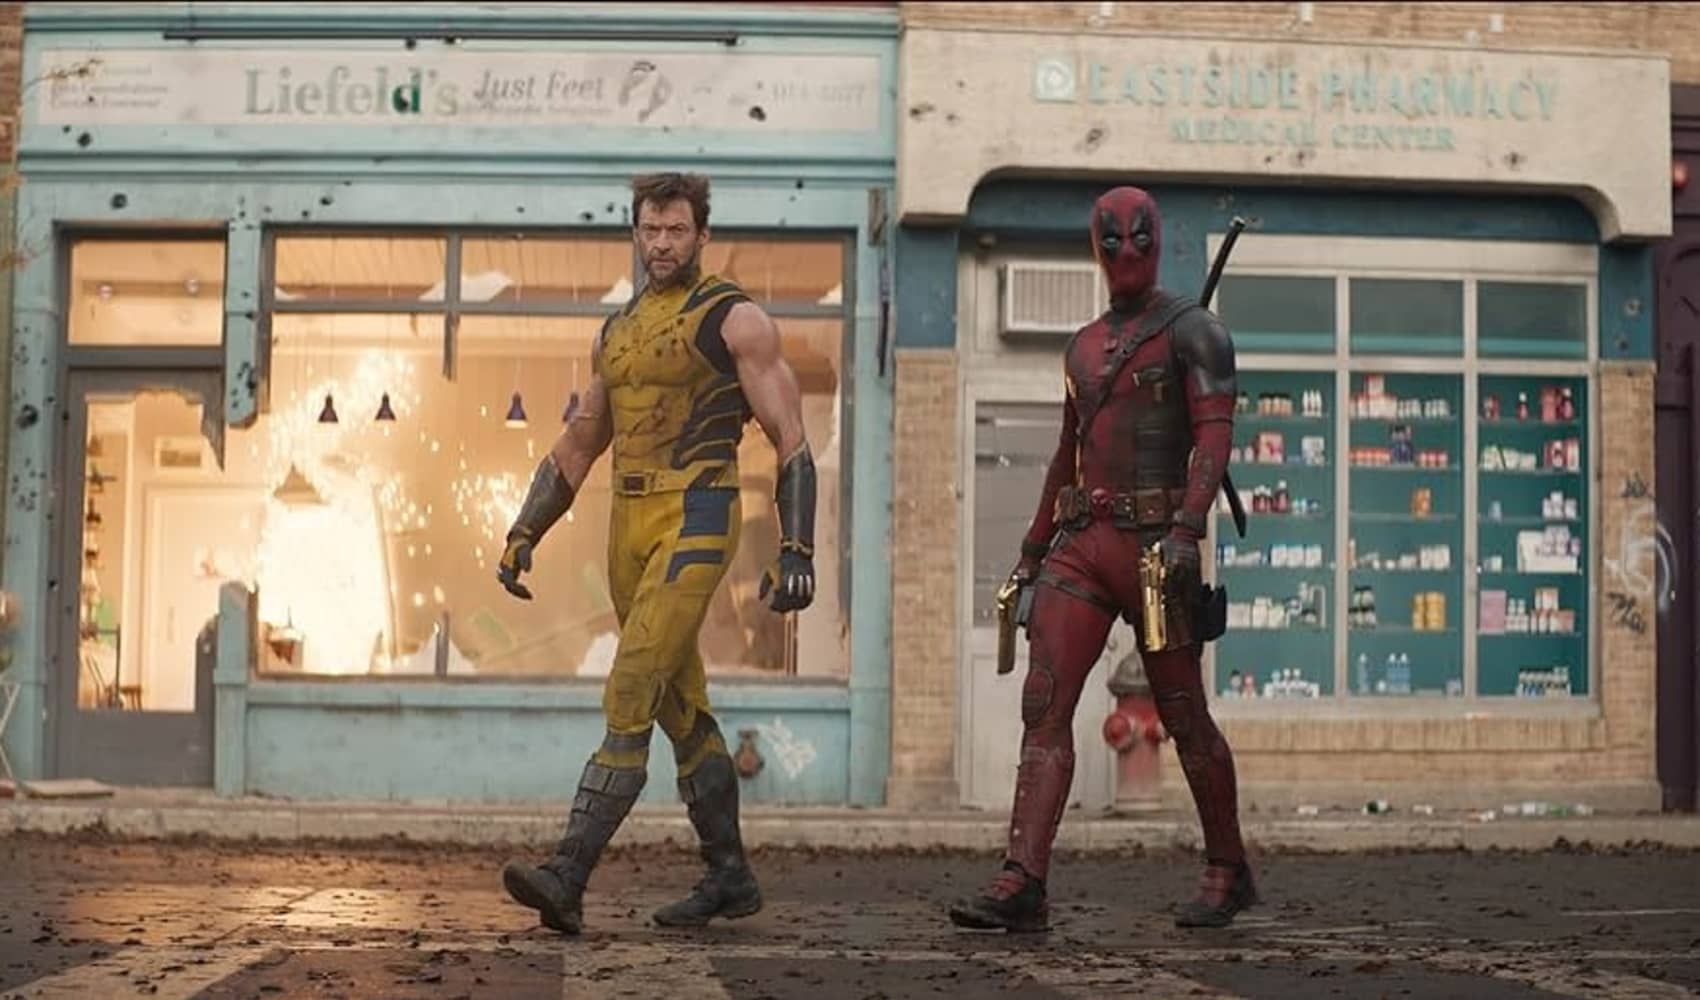 ‘Deadpool and Wolverine' snares $205 million domestic opening, highest R-rated debut ever